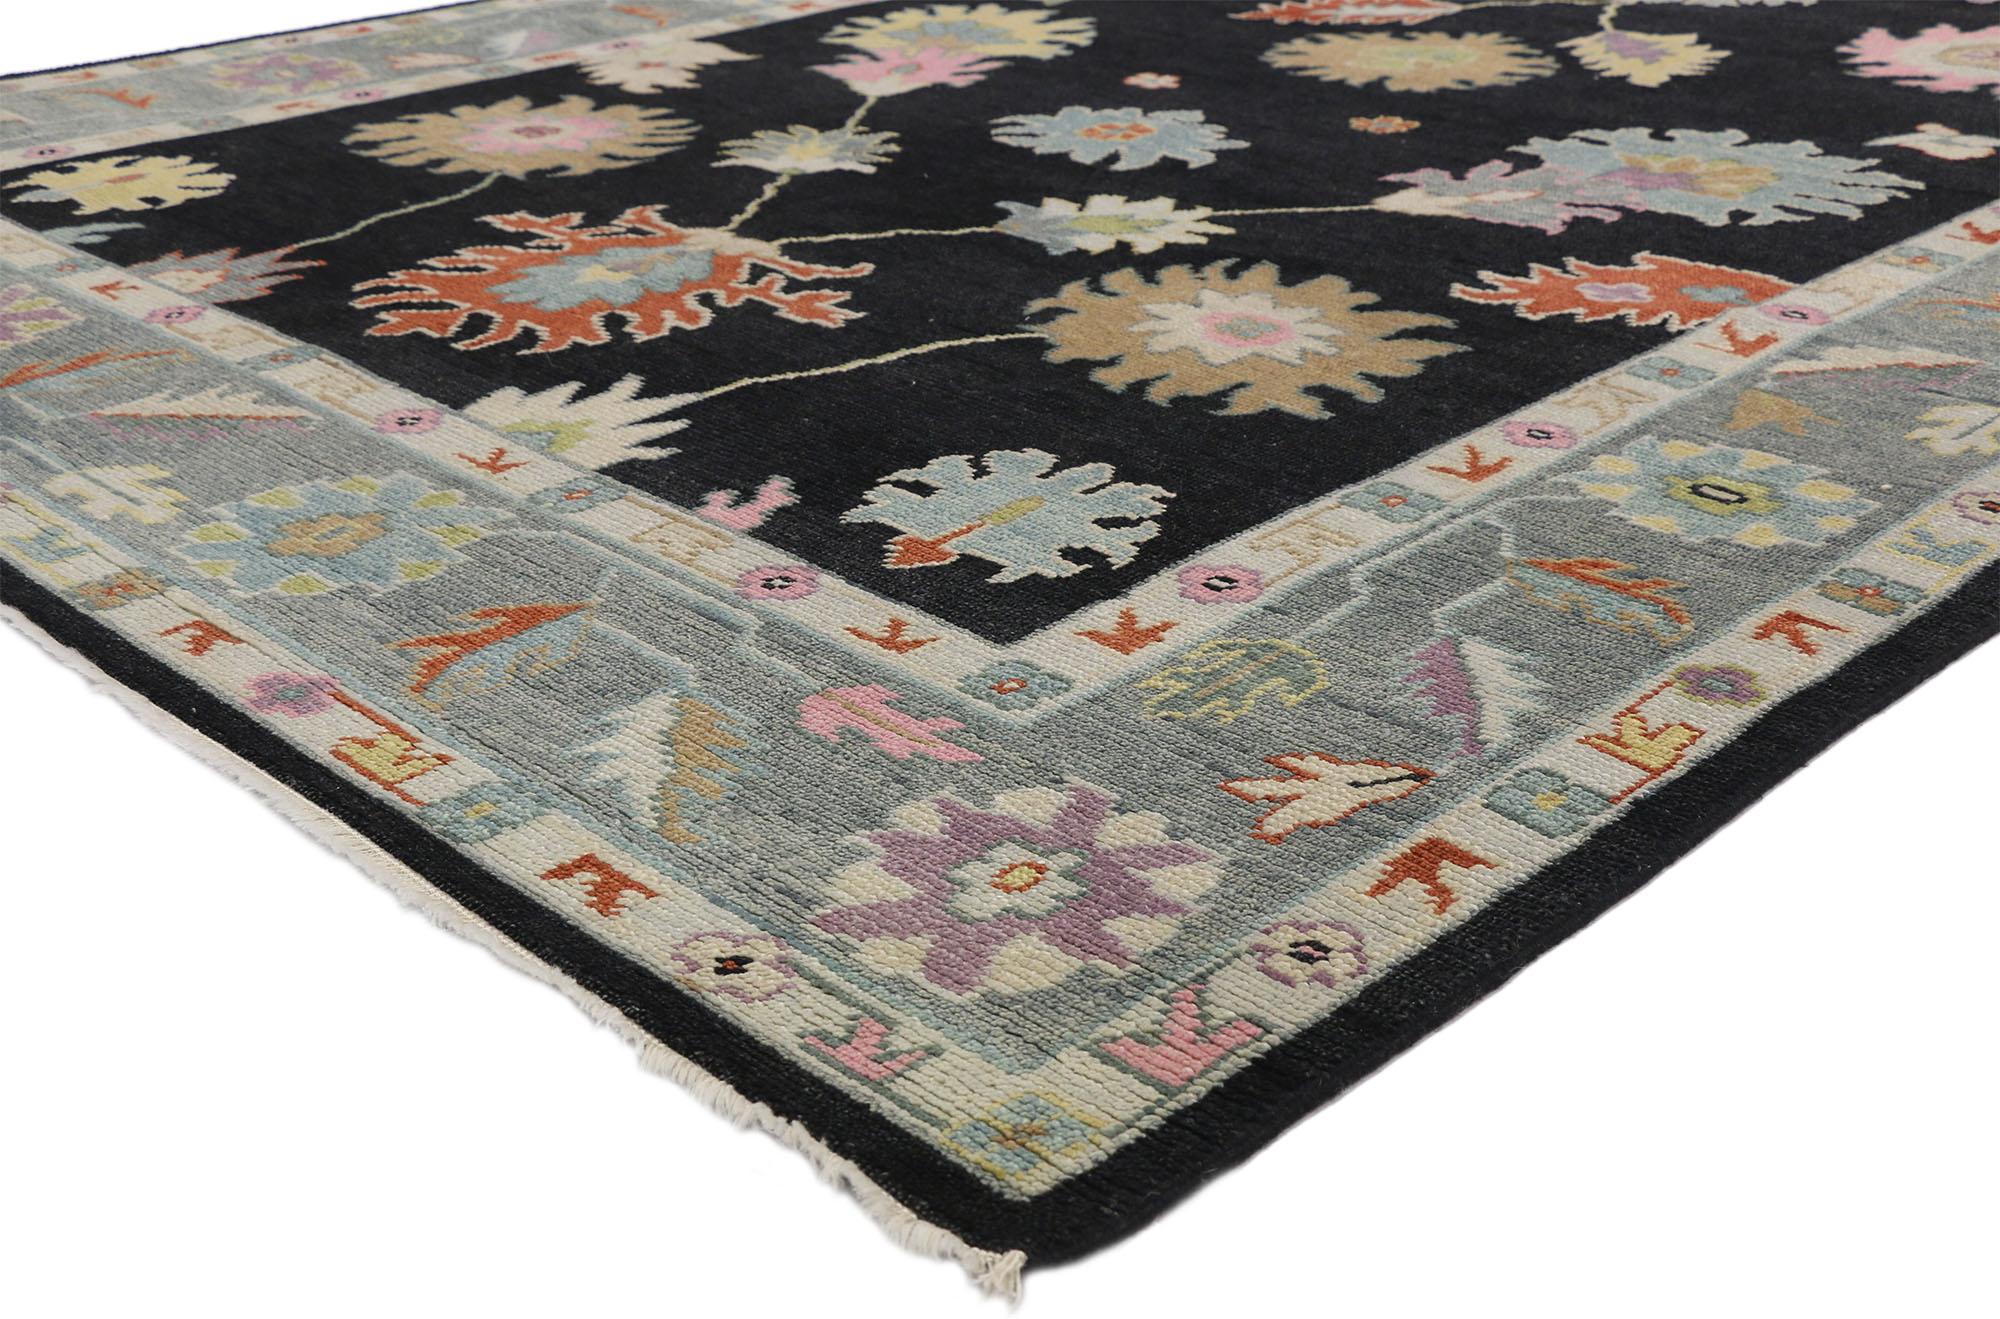 30505 New Colorful Black Oushak Rug, 09'00 x 12'03. In this hand-knotted wool colorful Oushak rug, contemporary elegance intertwines with stylish Anatolian charm to create a captivating masterpiece. Against a midnight black backdrop, an allover